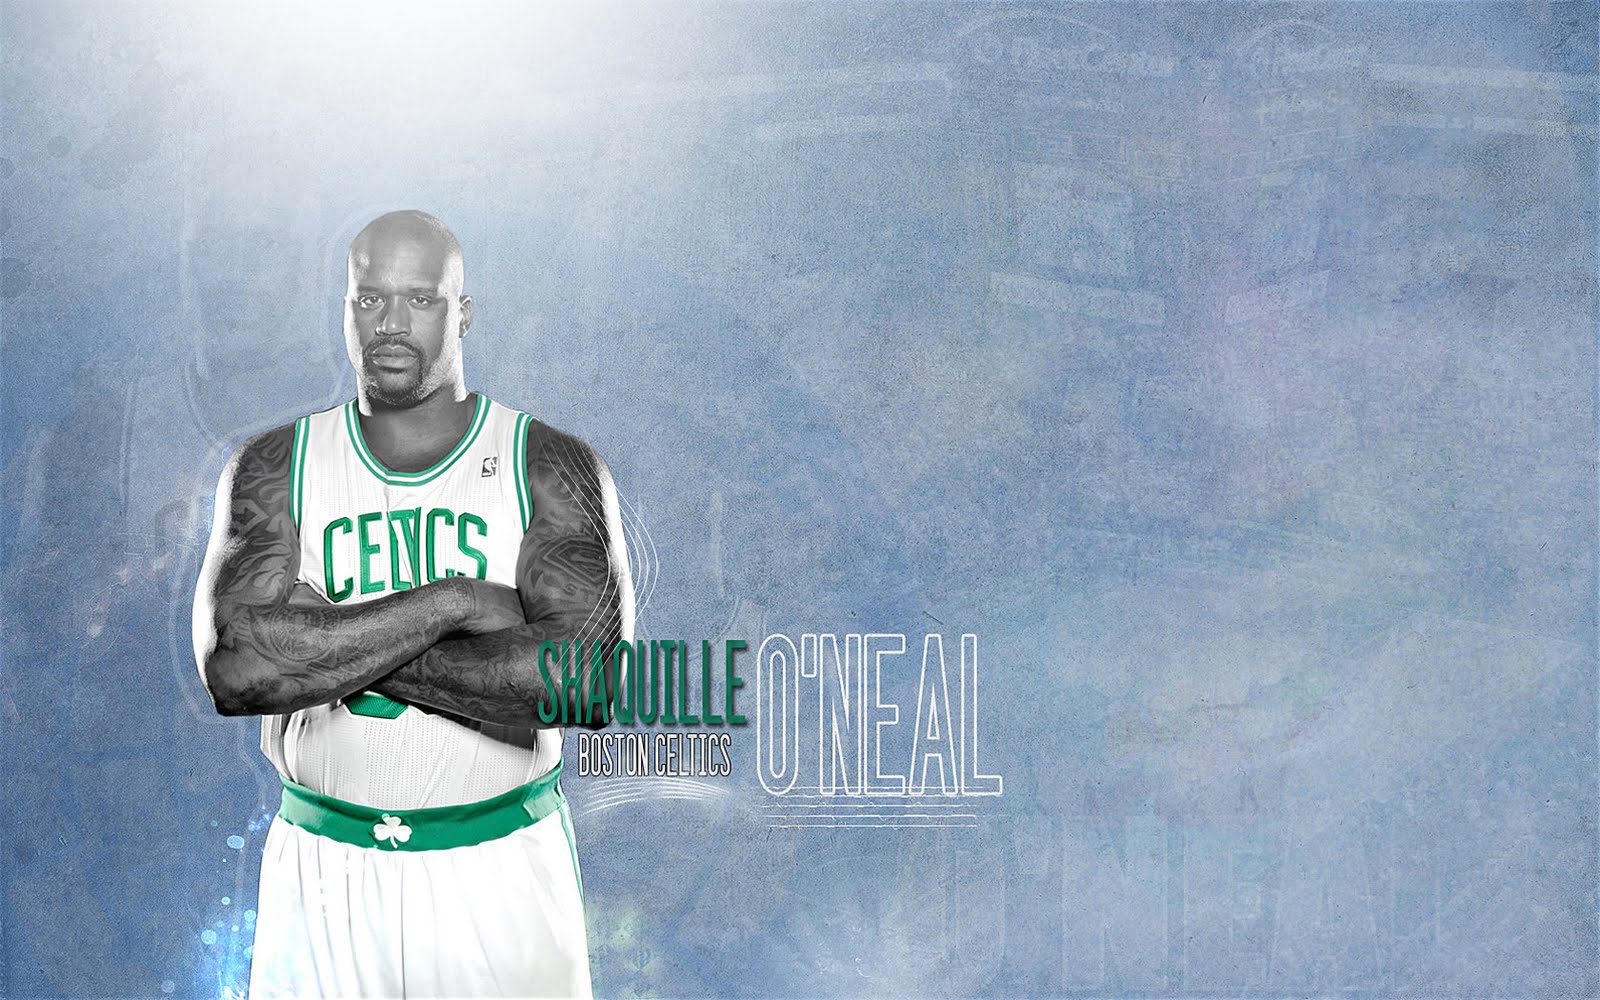 Shaquille O Neal Professional Basketball Player